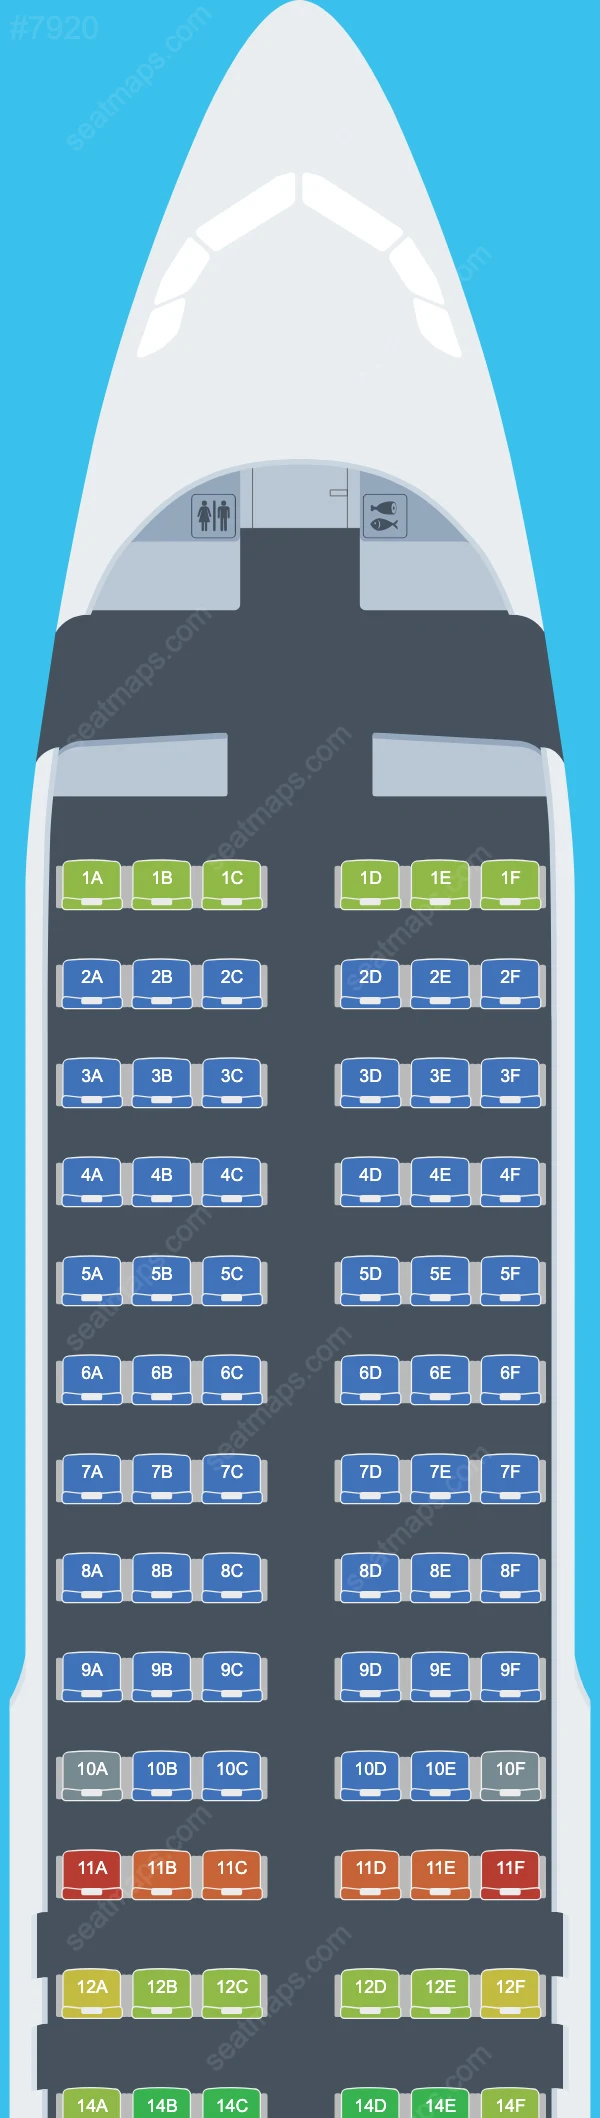 Flyadeal Airbus A320 Seat Maps A320-200